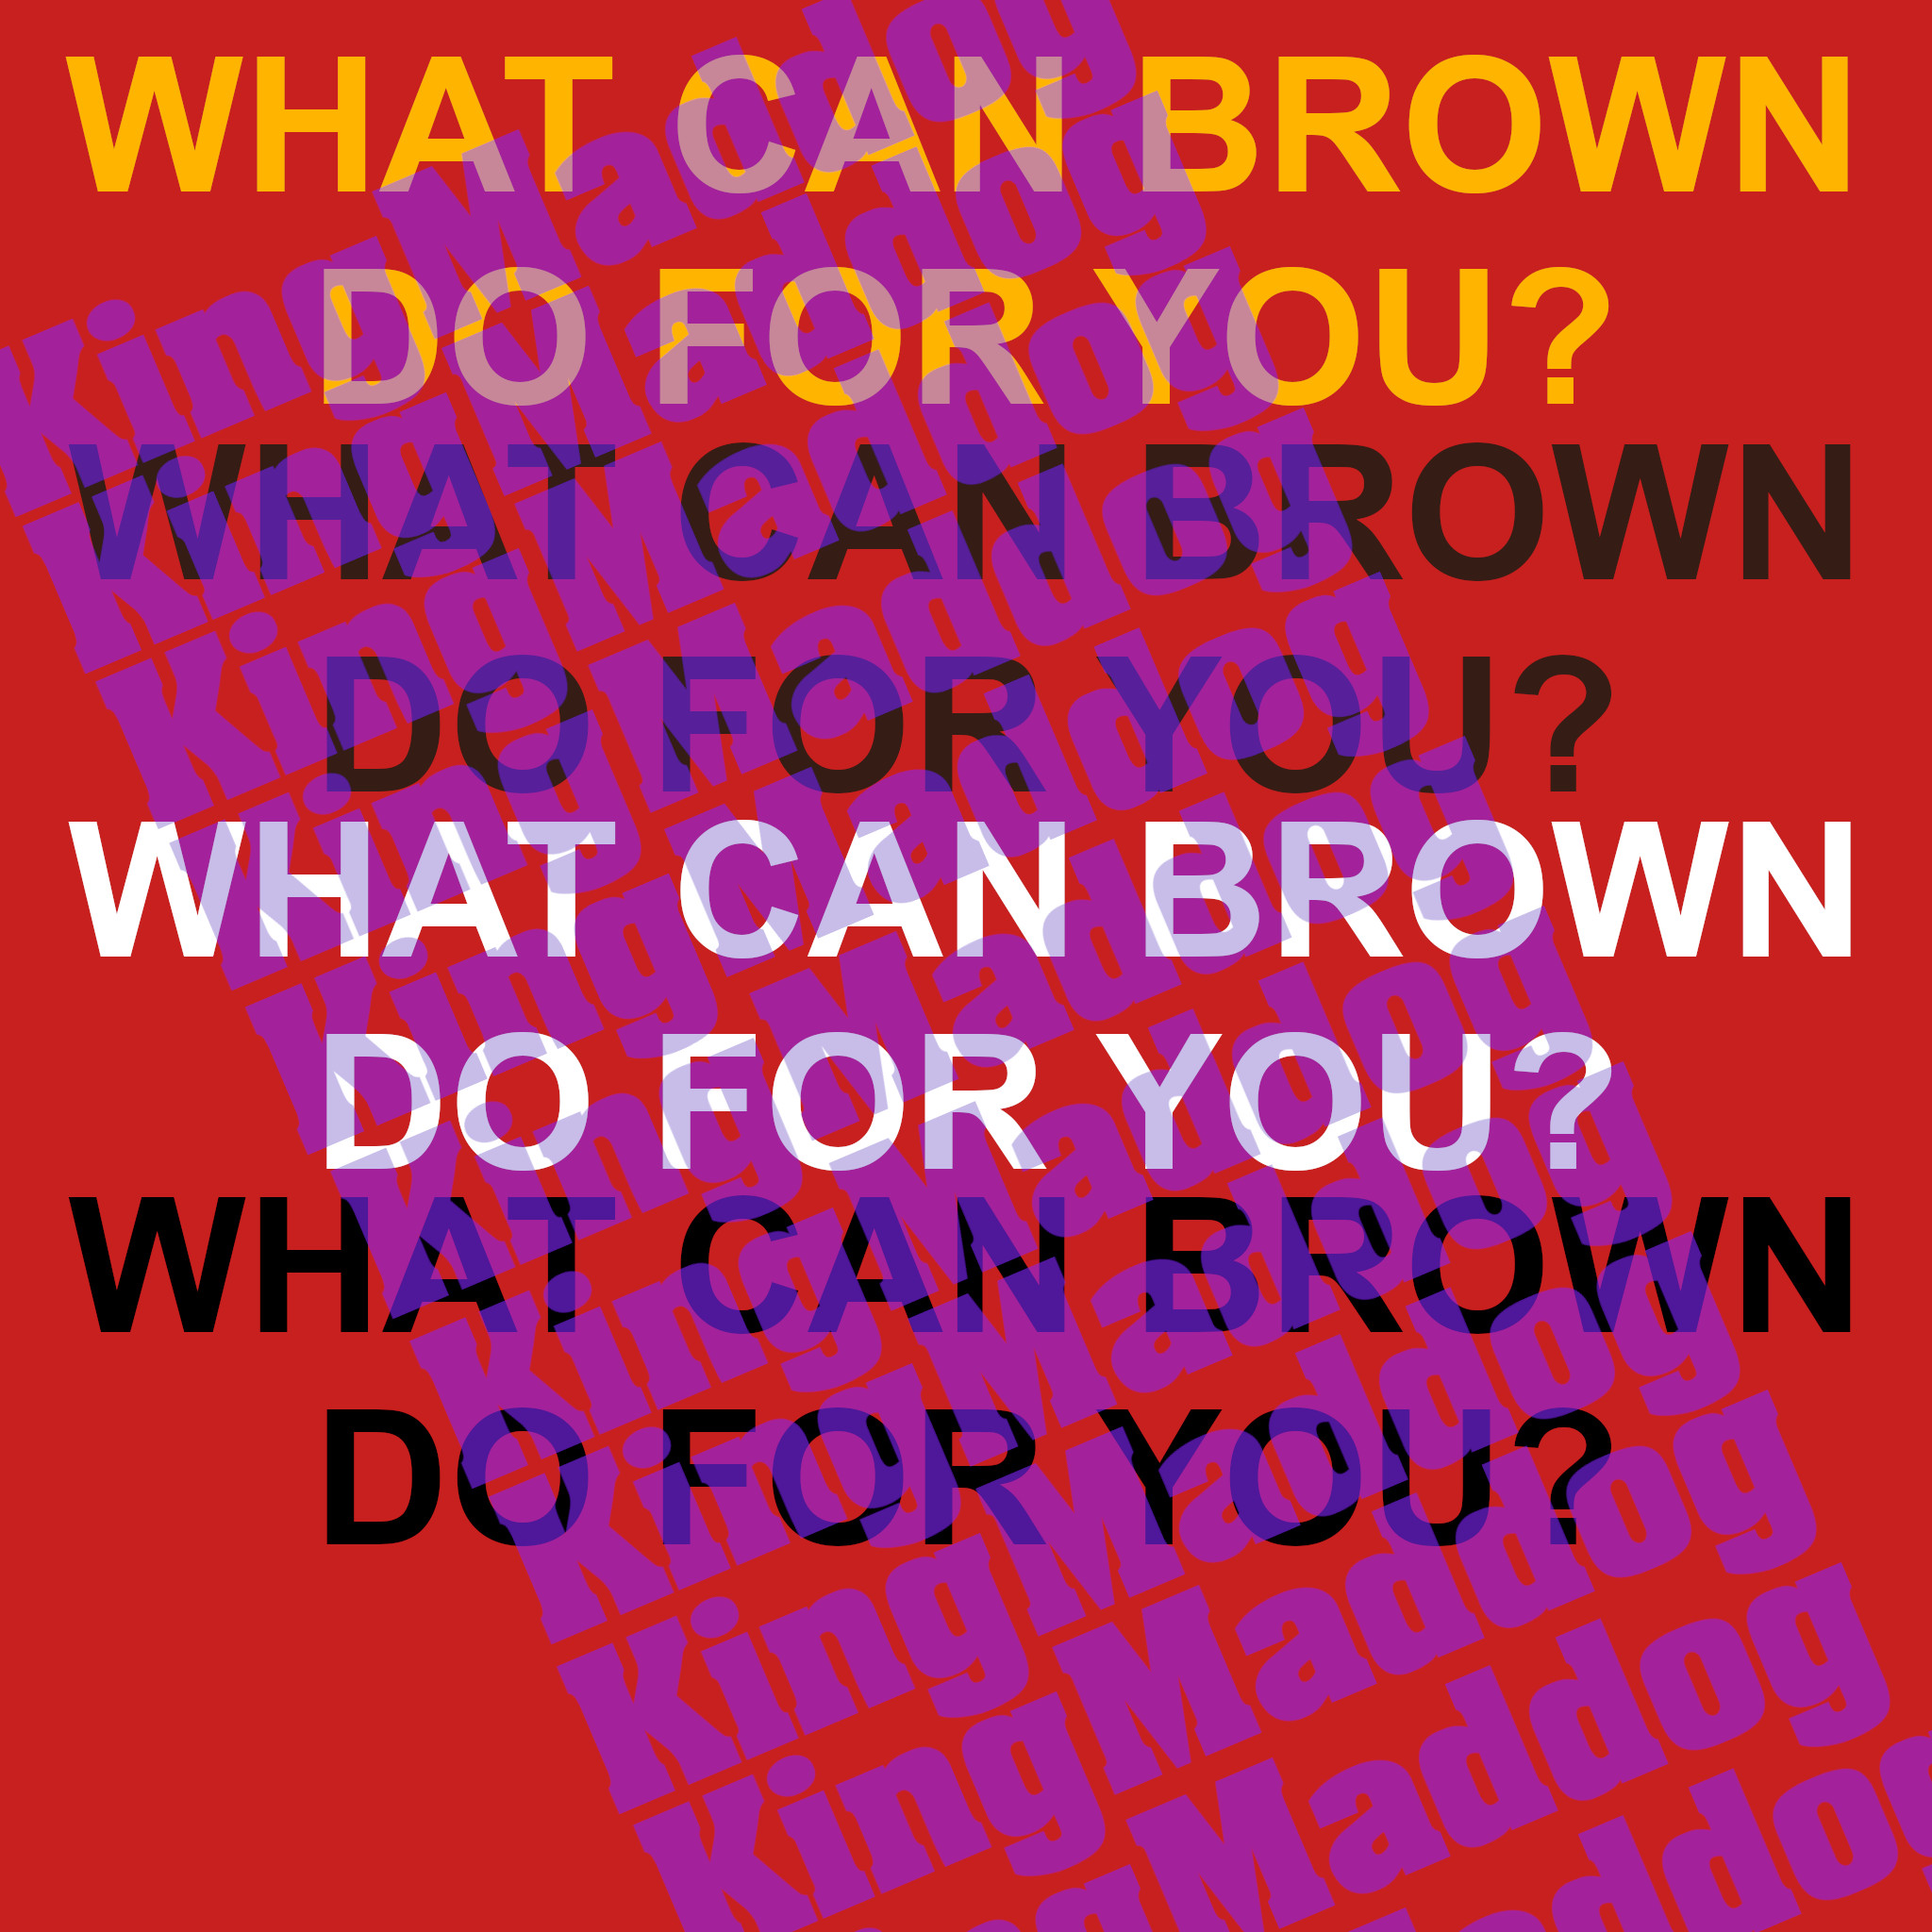 What CAN BROWN DO FOR YOU.jpg